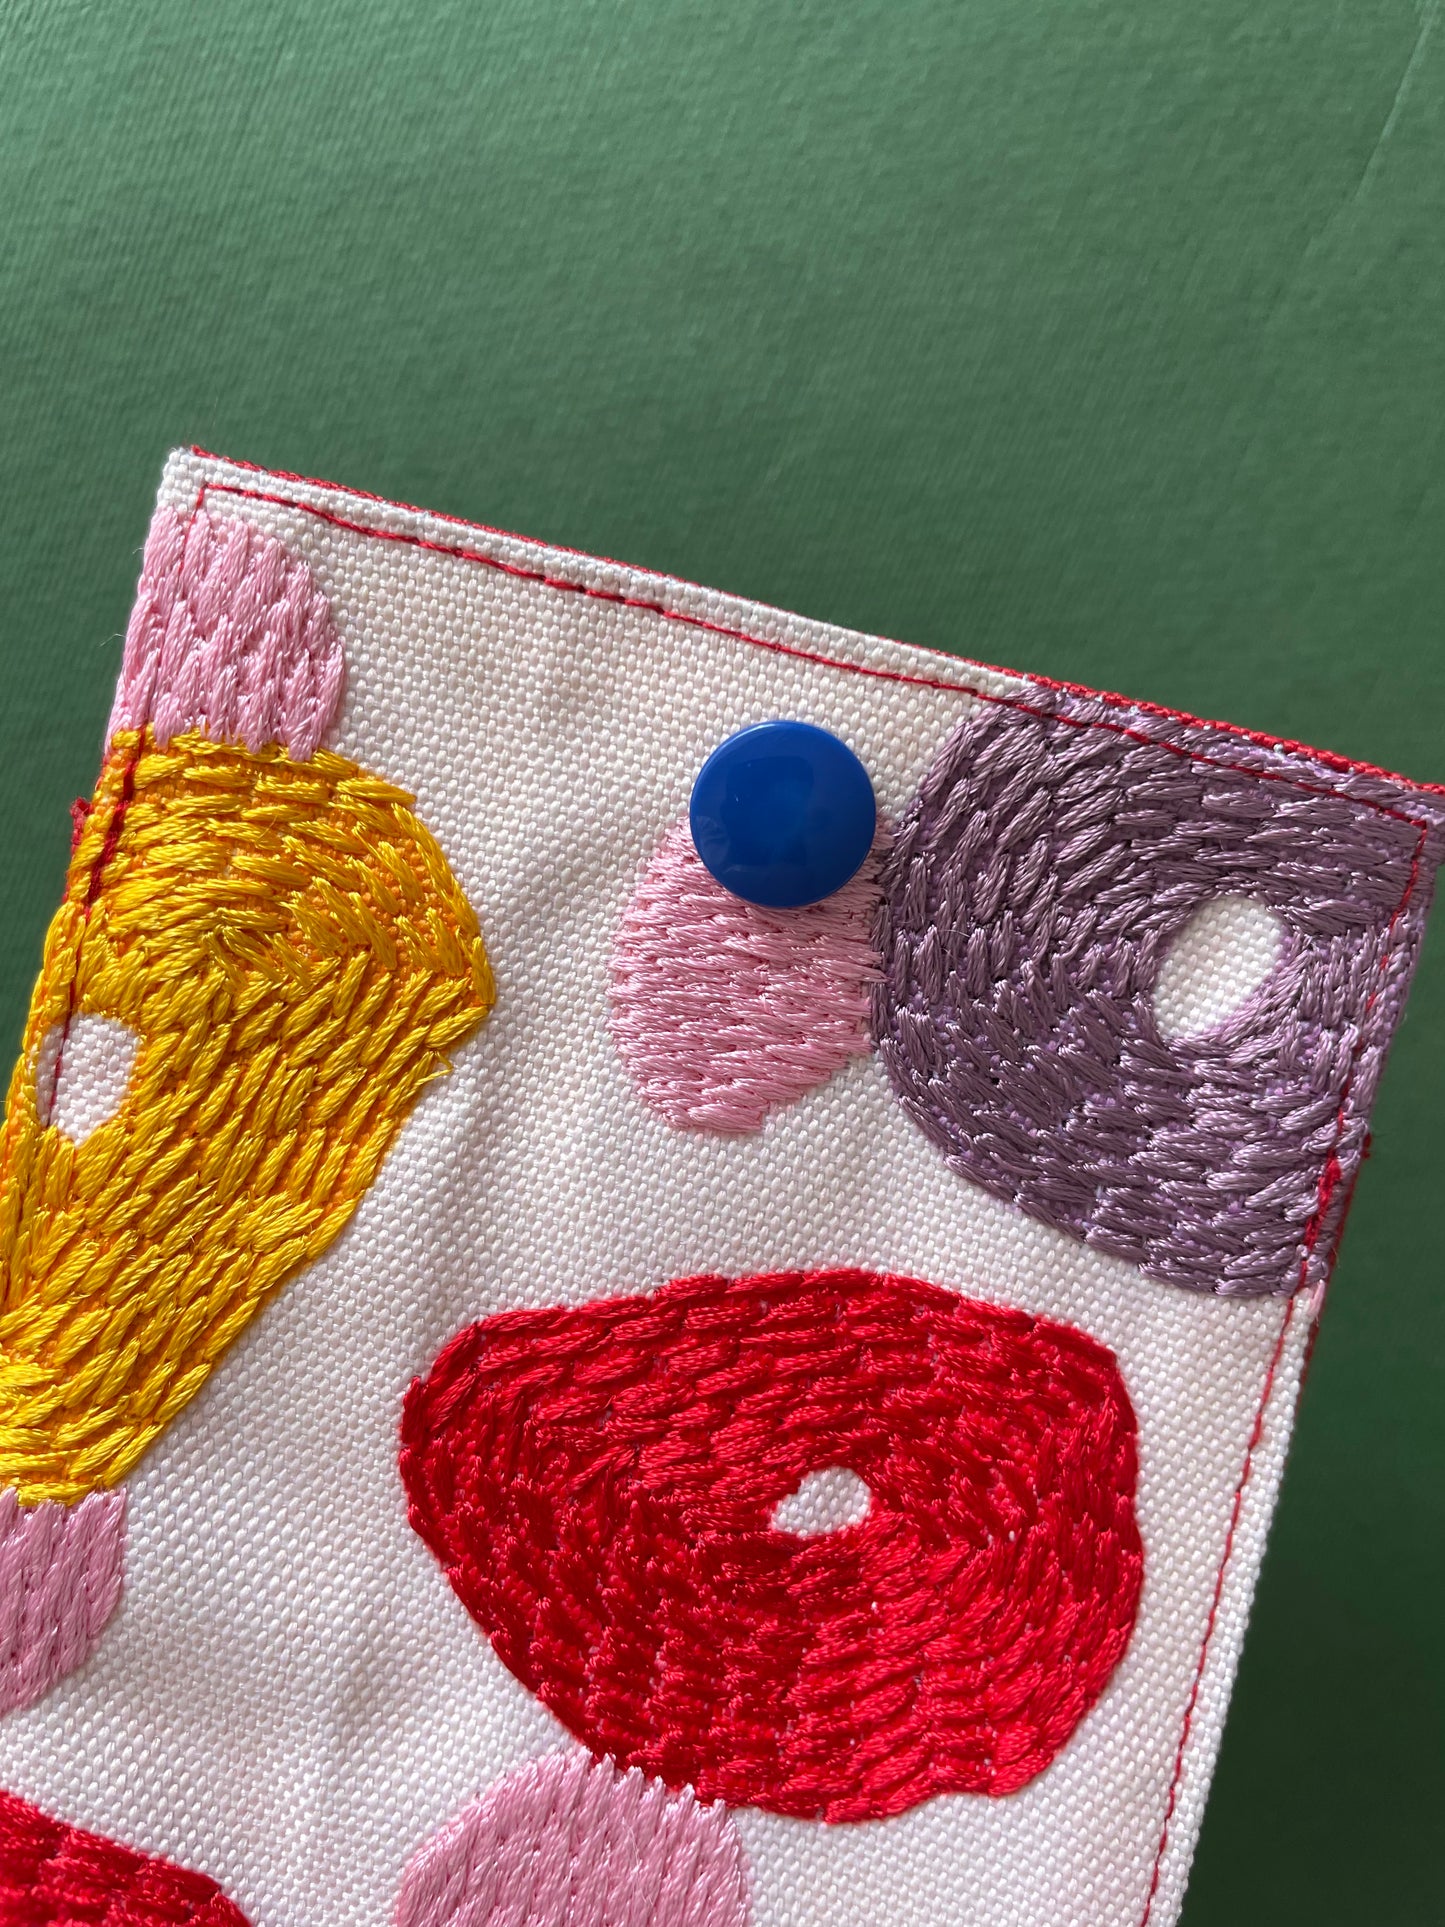 Embroidery Card Holder - Red Dots